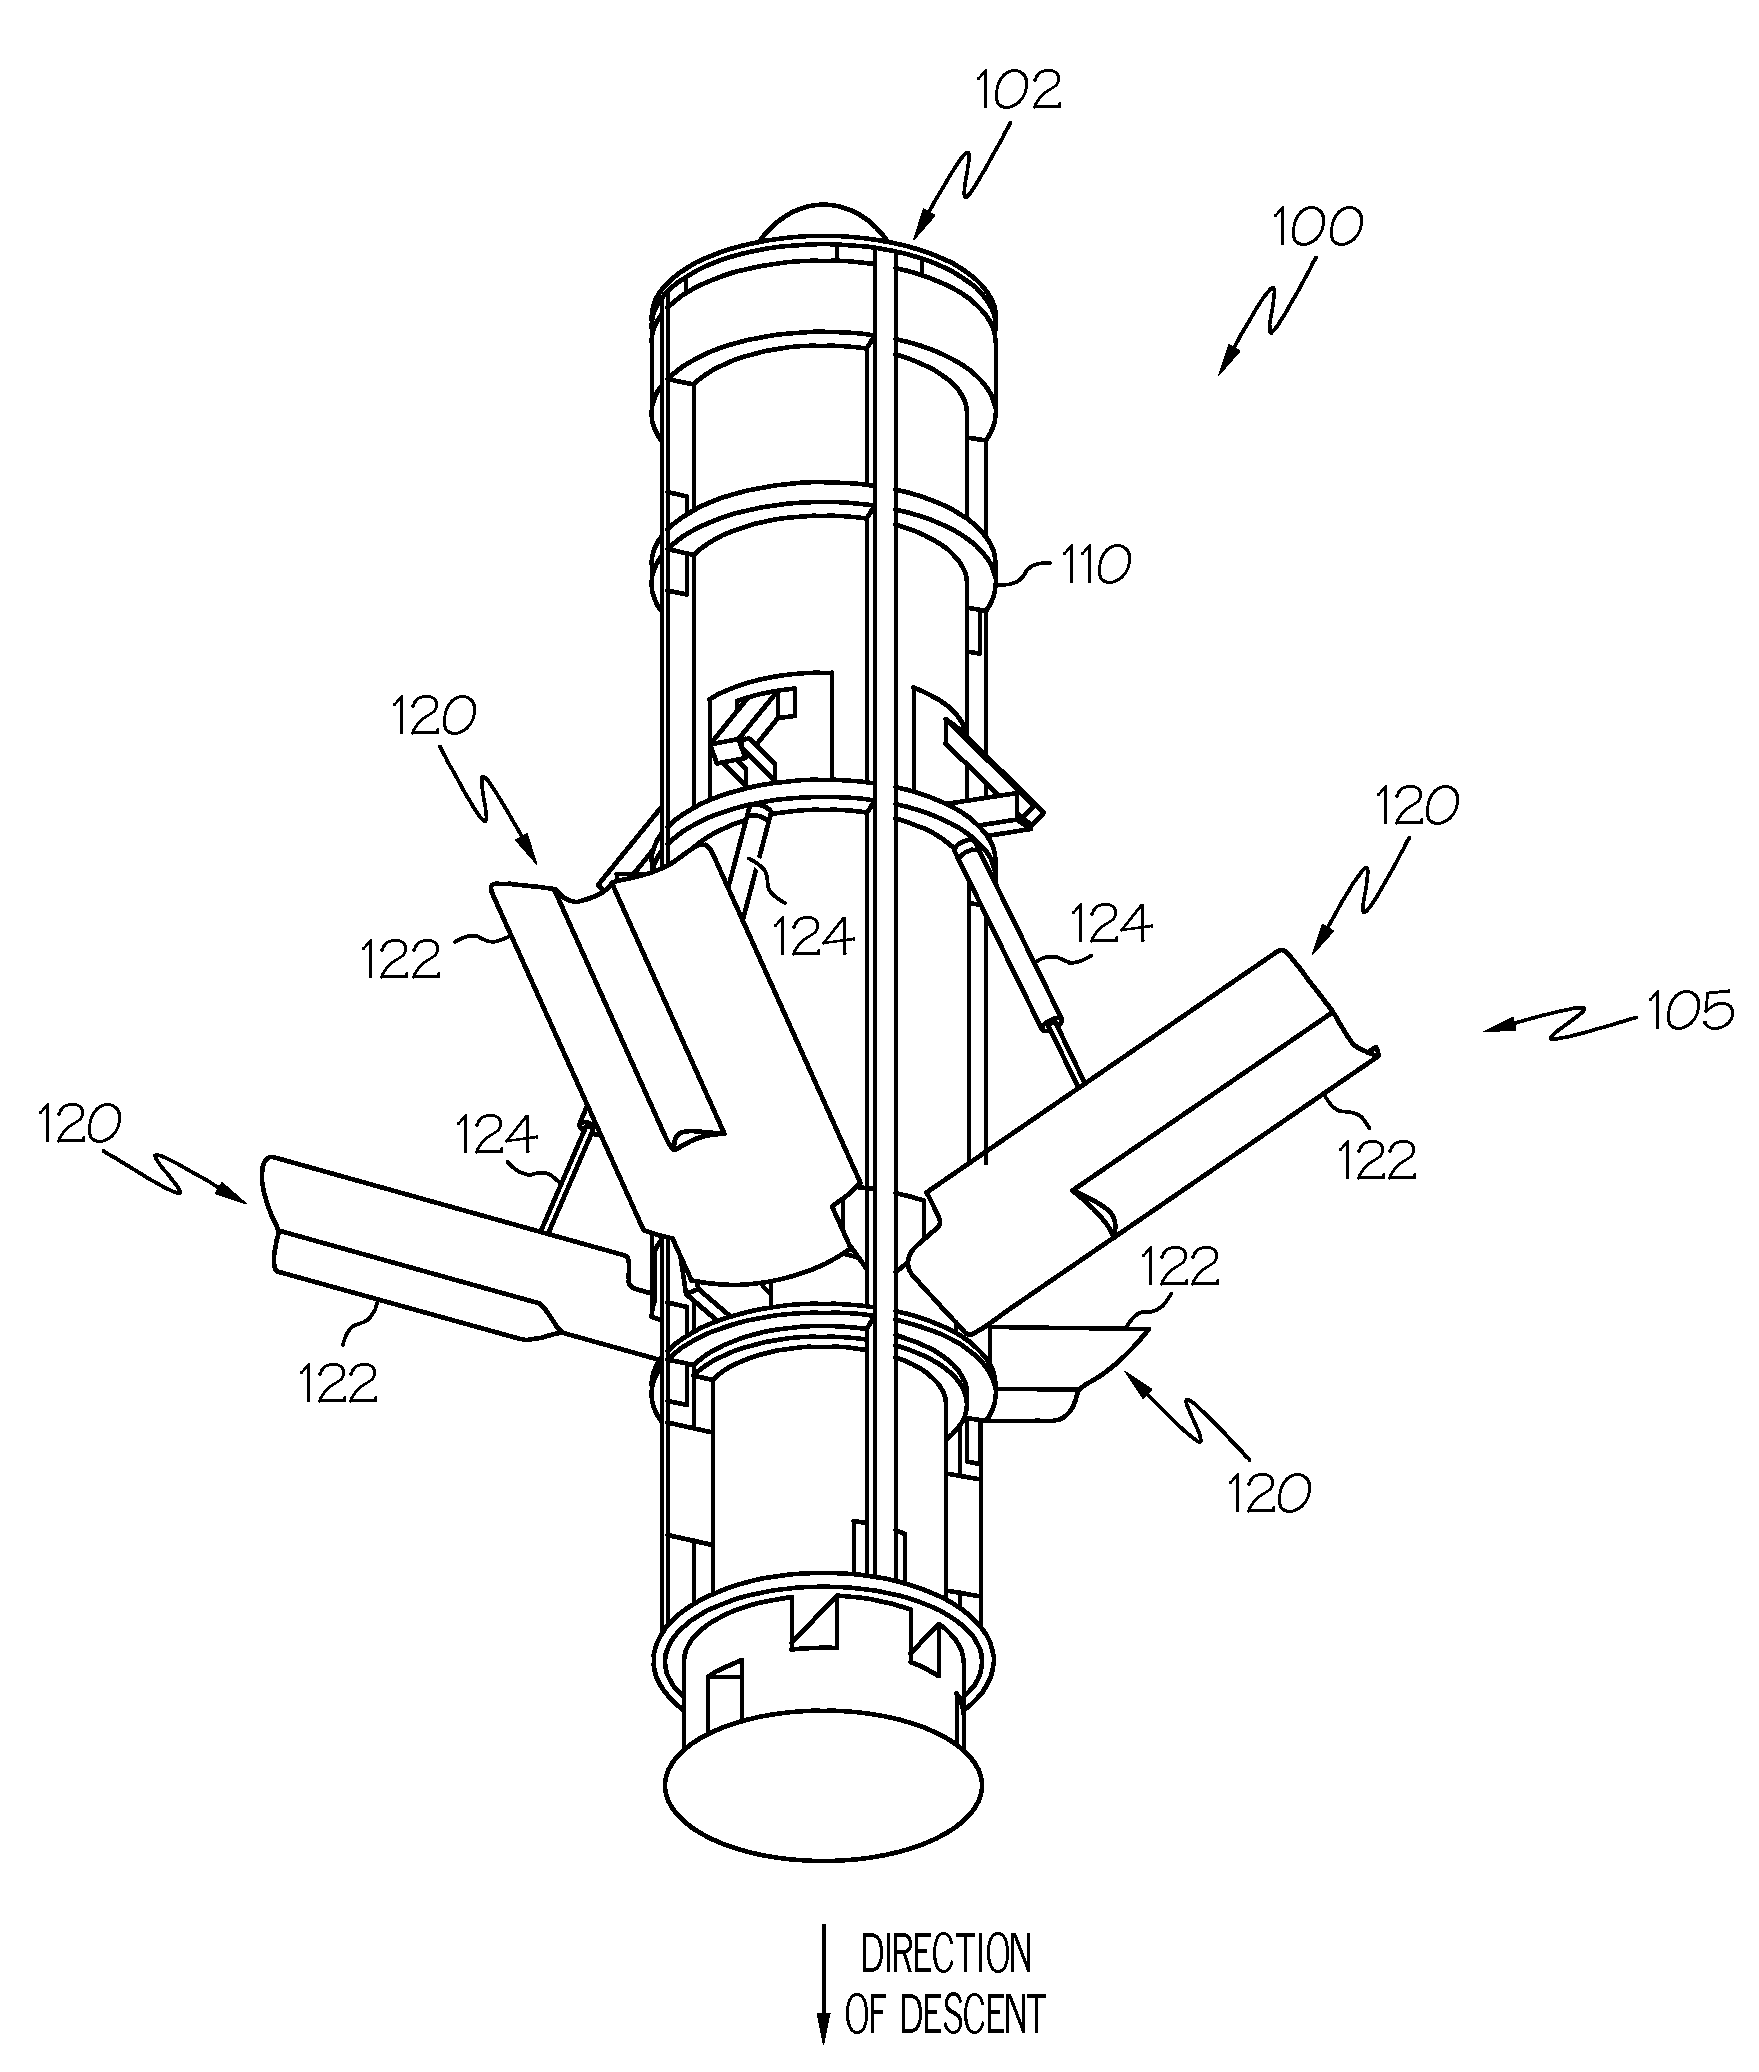 Systems and methods for underwater descent rate reduction